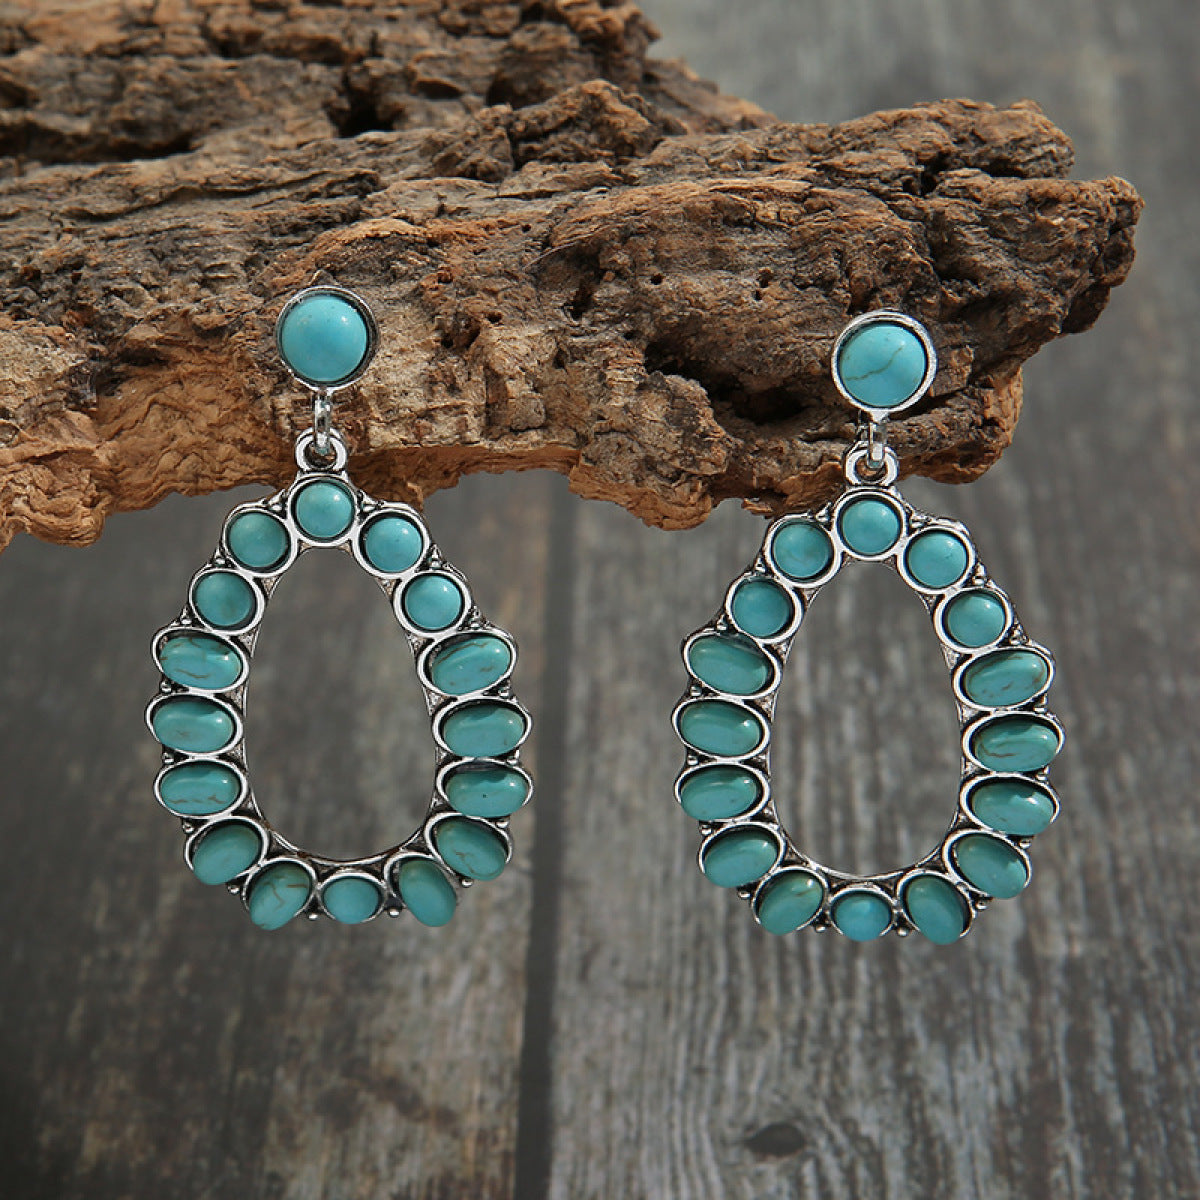 Retro Teardrop Hollow Inlaid Turquoise Drop Earring - Mulberry Skies